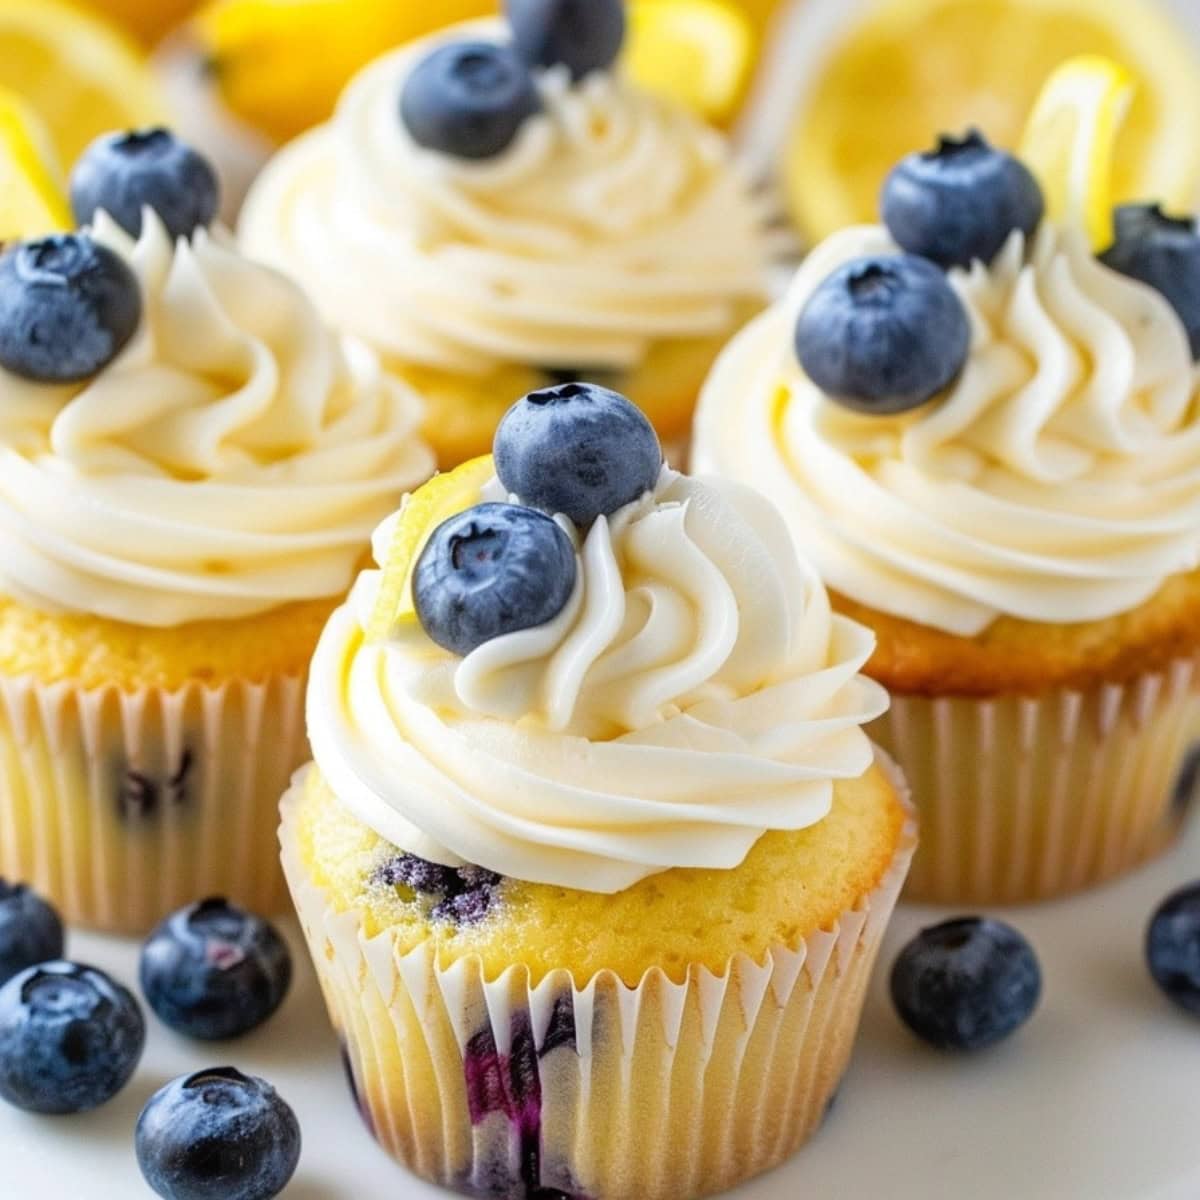 Bunch of lemon blueberry cupcakes with creamy frosting garnished with berries and lemon zest.